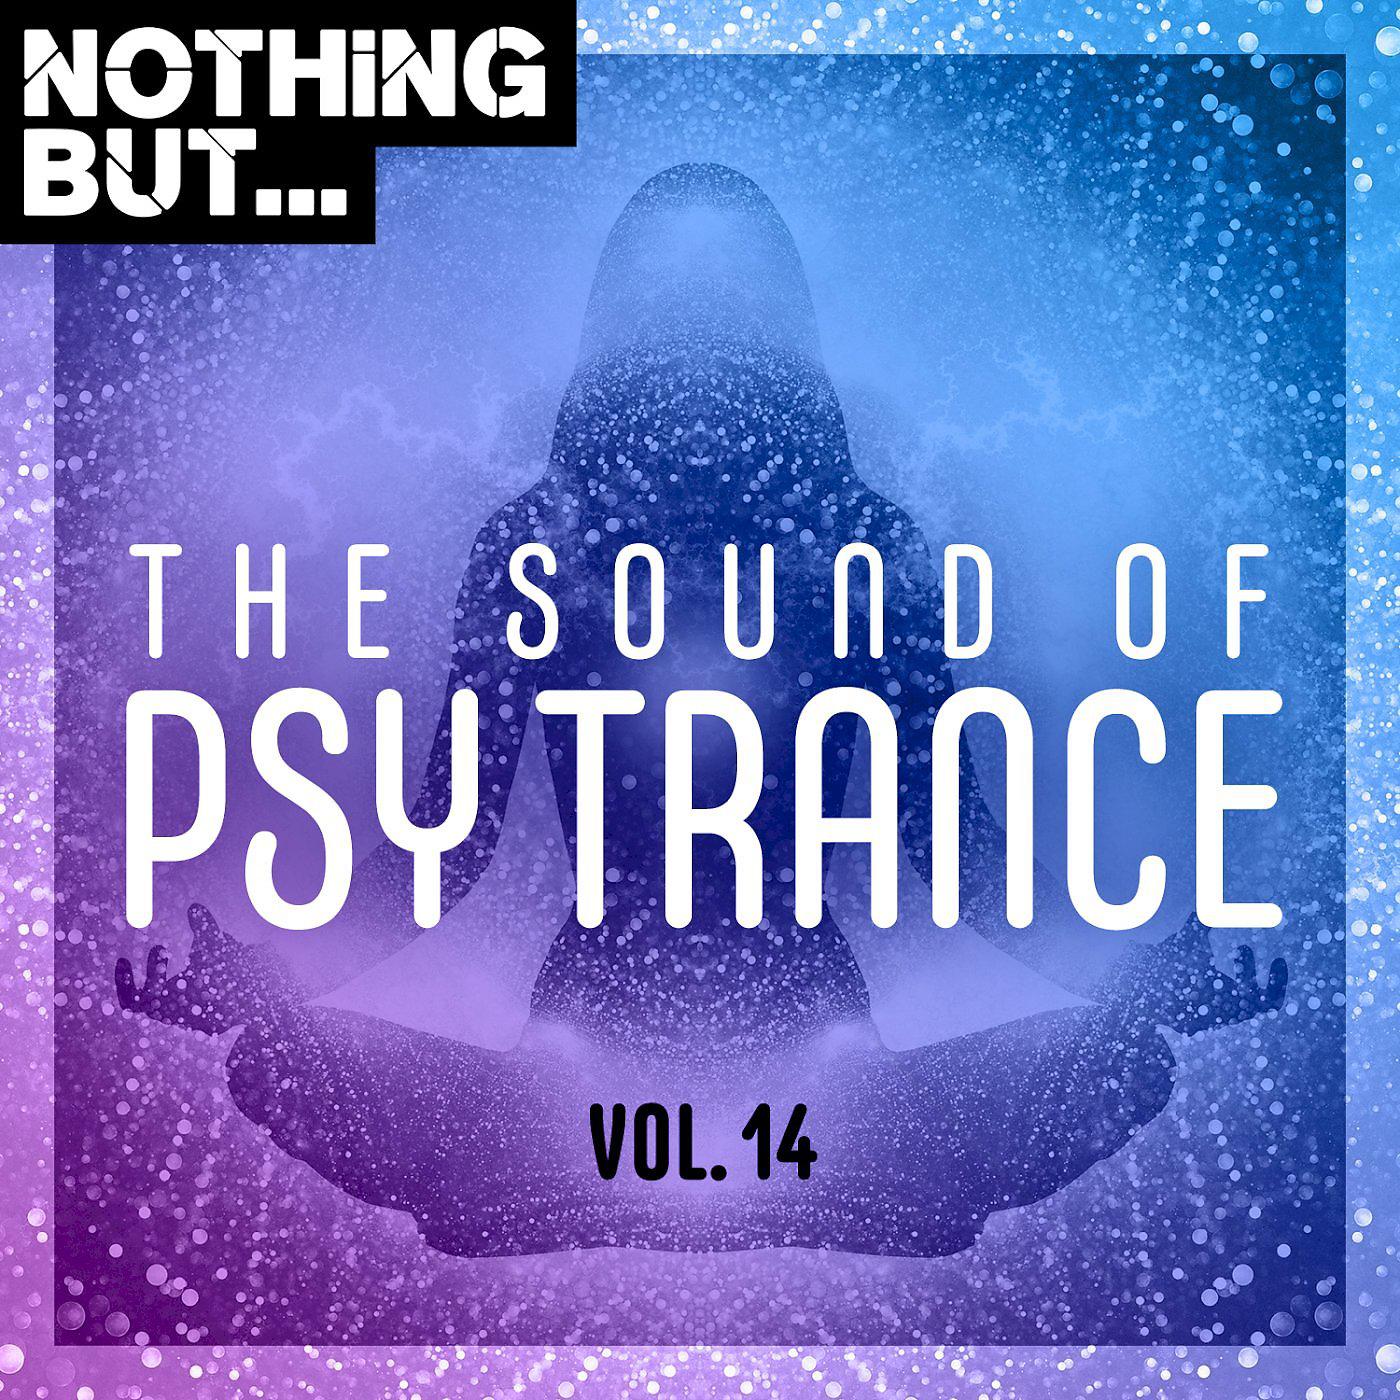 Постер альбома Nothing But... The Sound of Psy Trance, Vol. 14